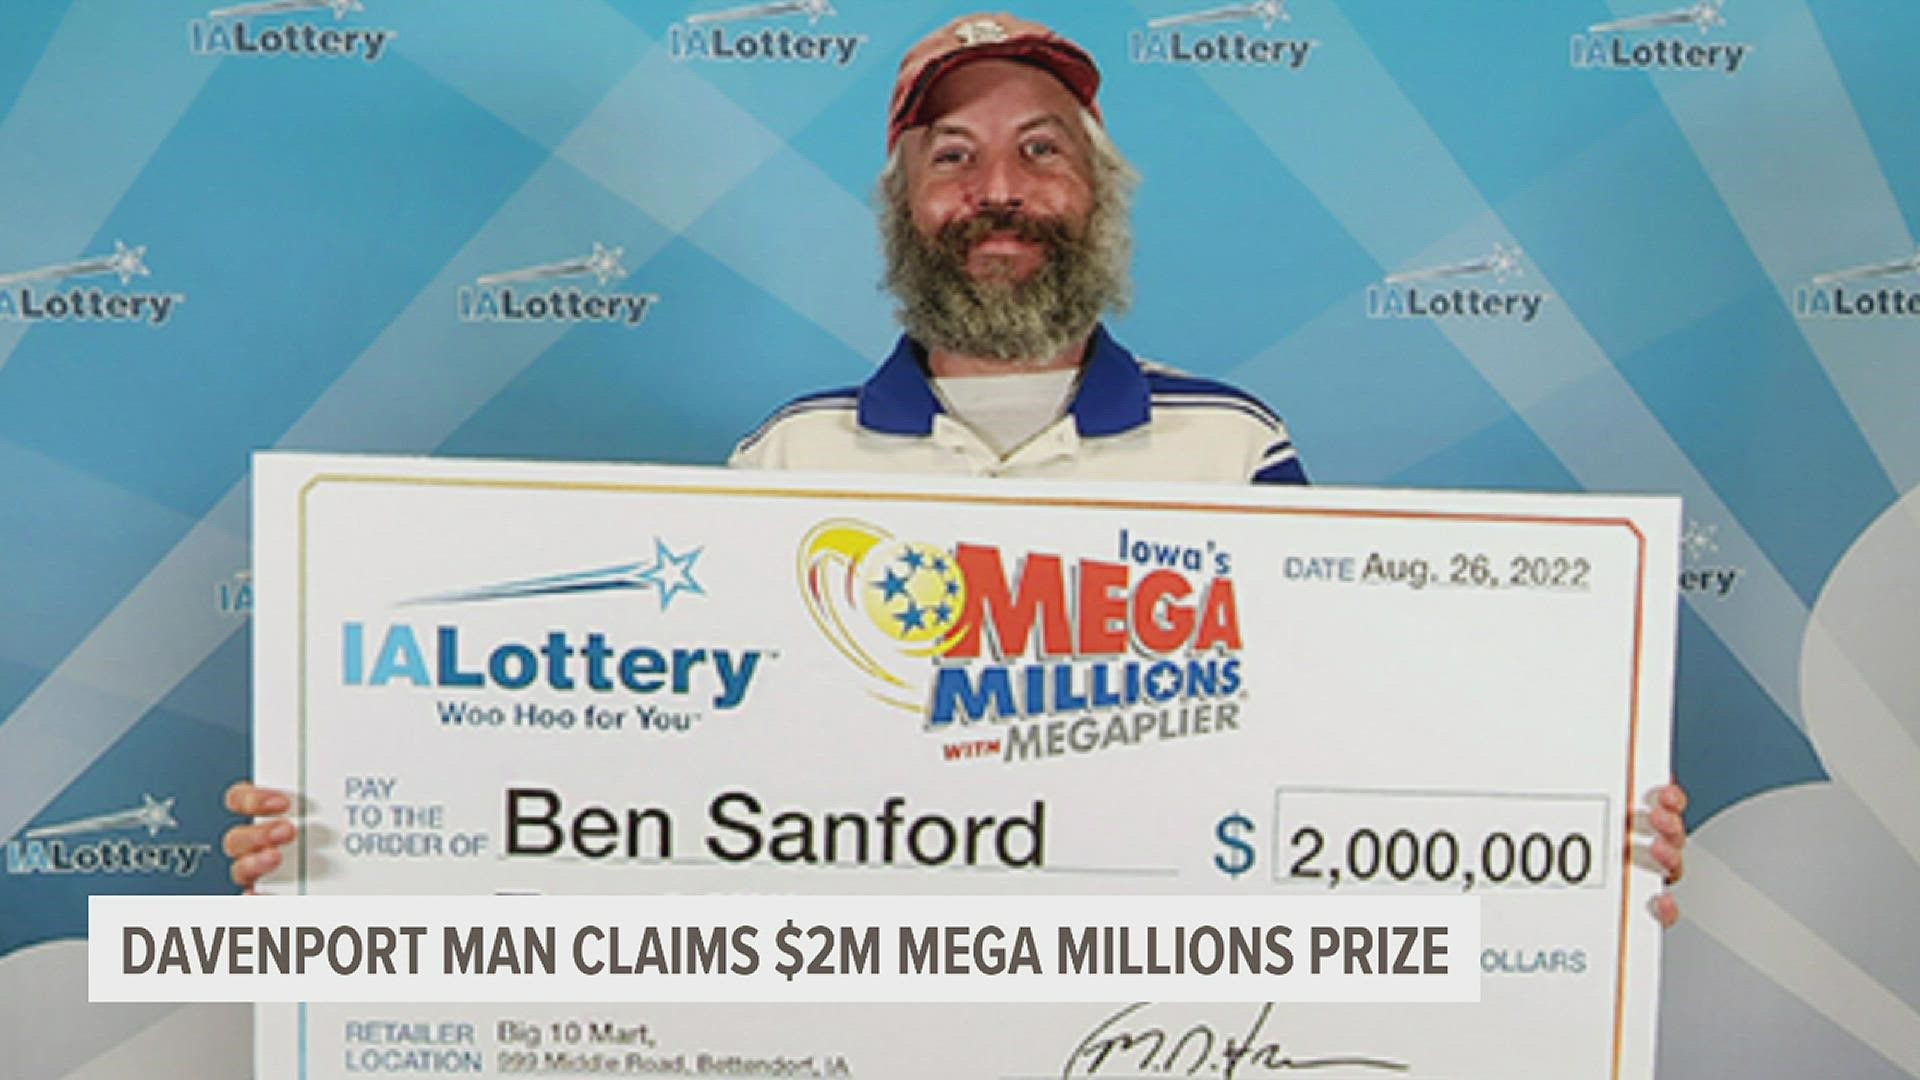 After winning the drawing last month, Ben Sanford made plans with his stepfather to split the earnings, as they've always said they'd do.